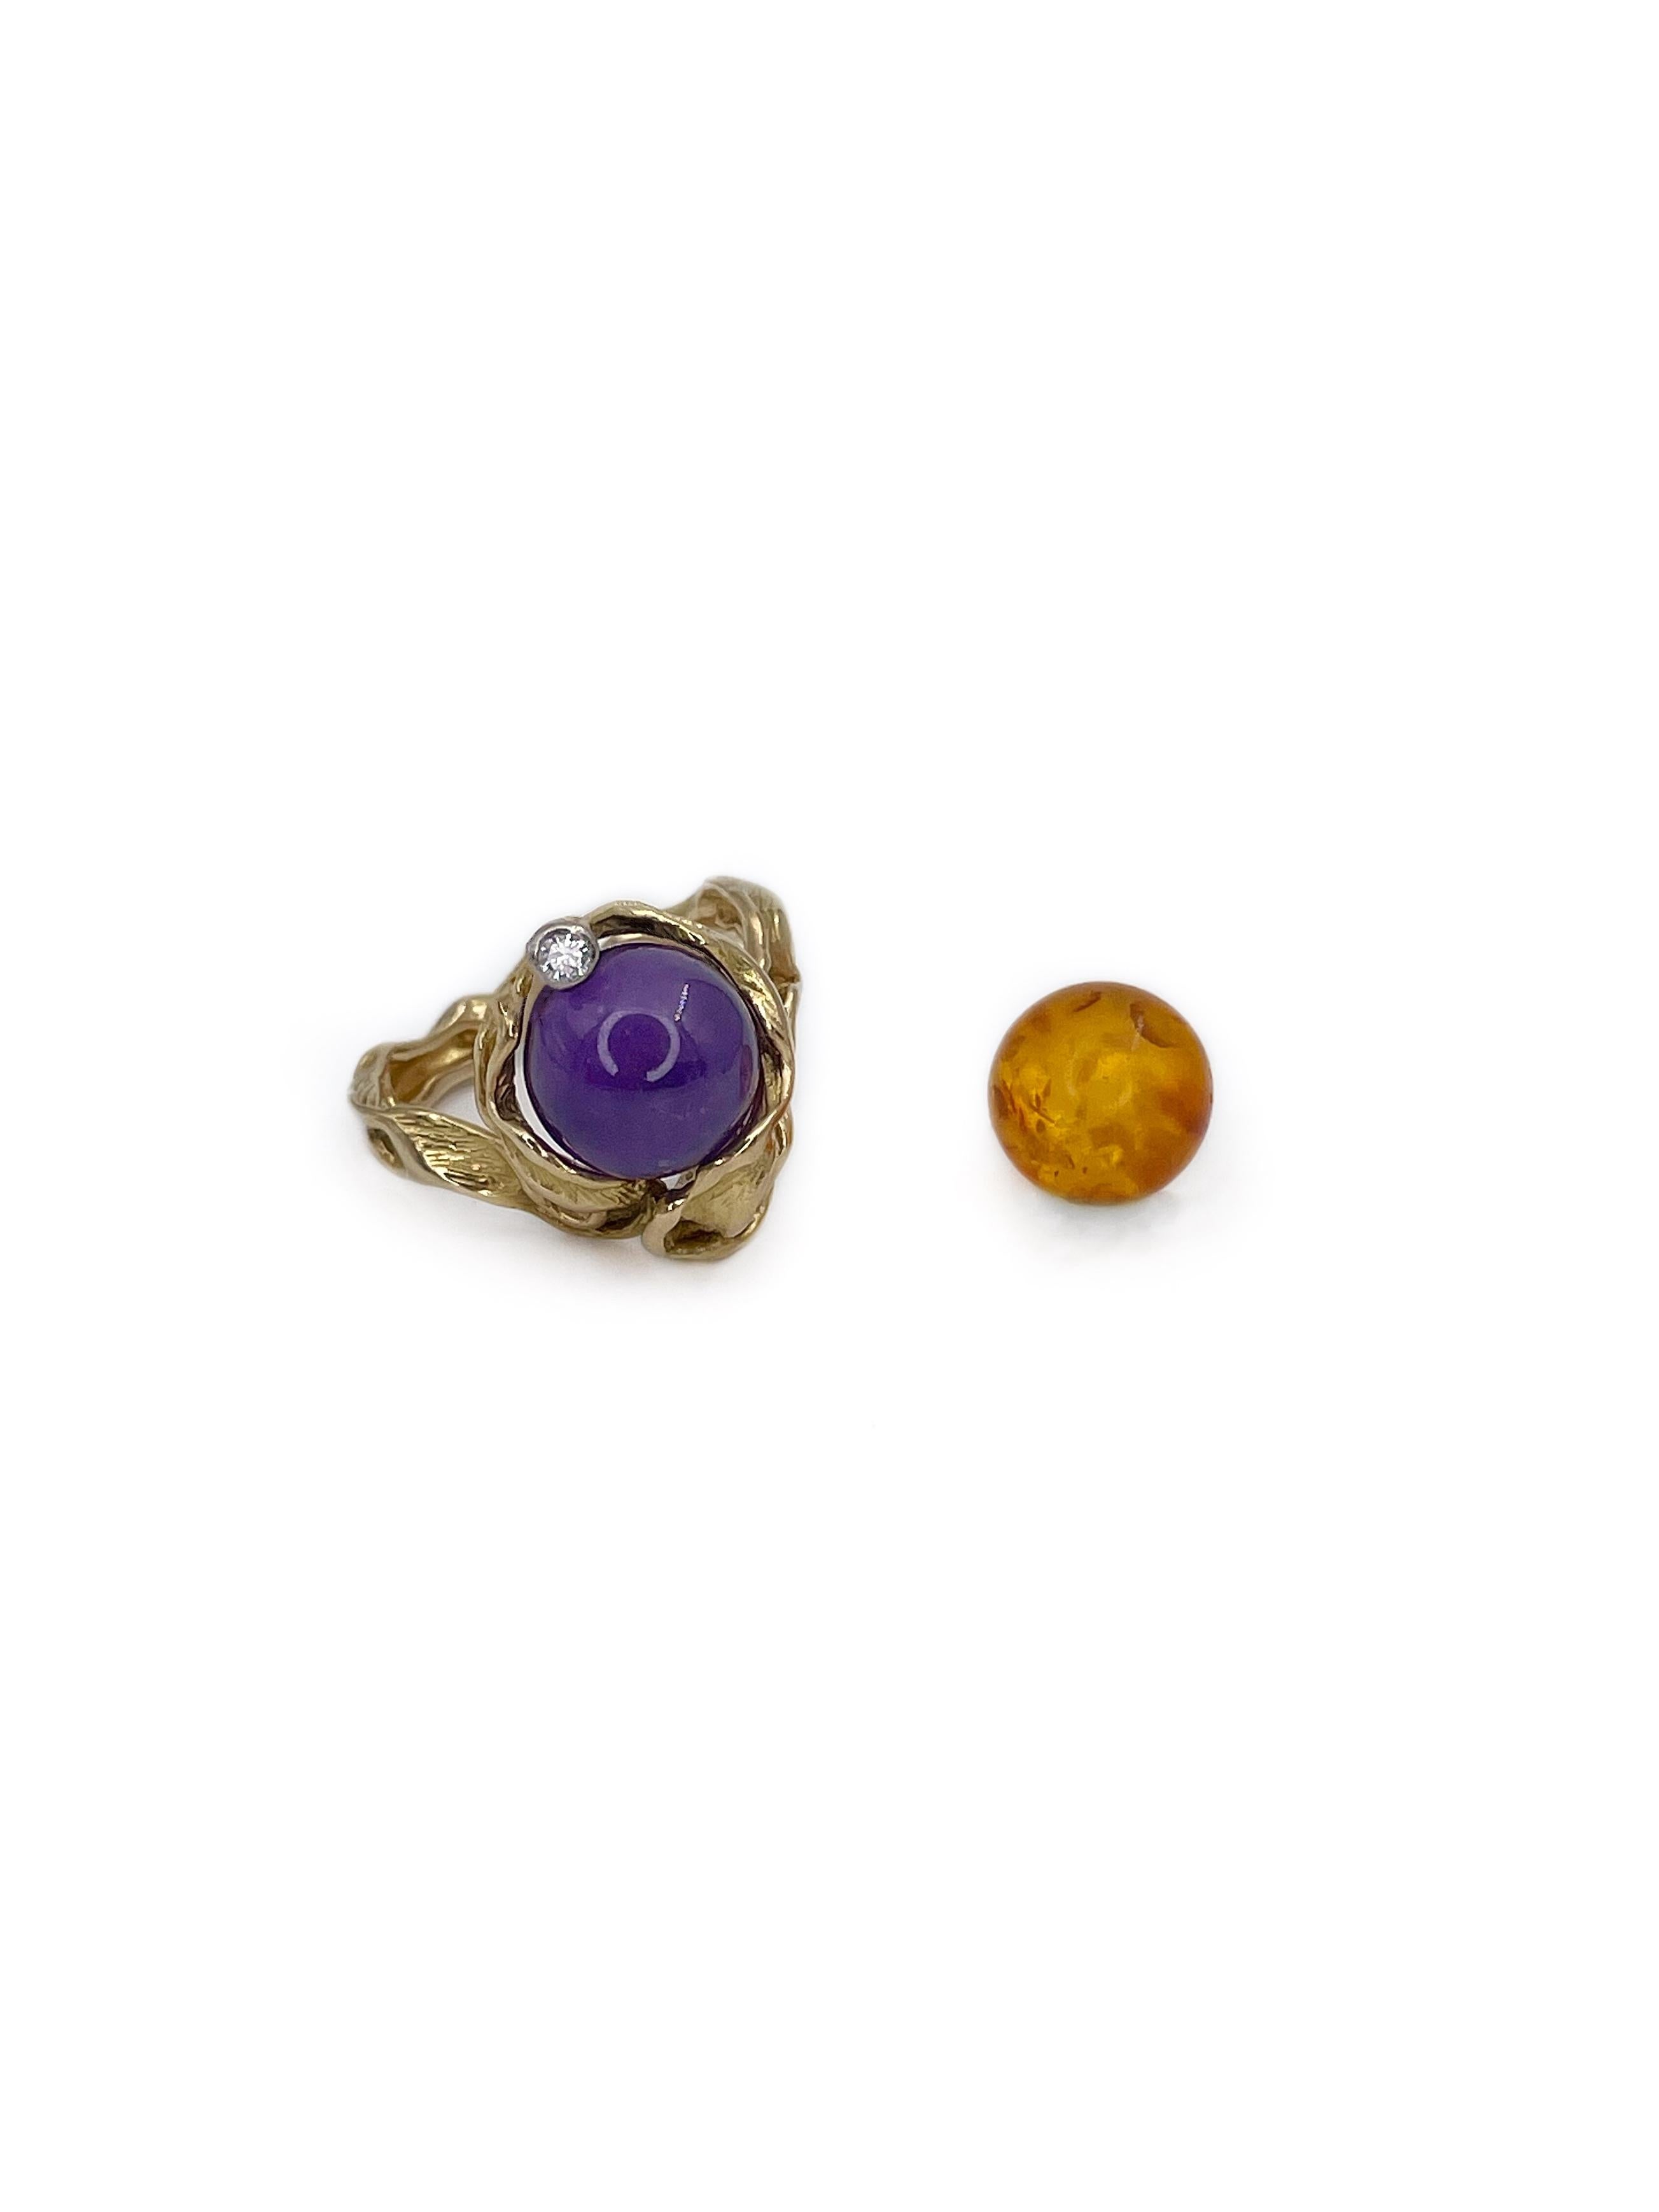 This is a dynamic ring designed by Swiss jeweler Gilbert Albert in 1970s. It is crafted in 18K yellow gold and adorned with a diamond. There are 11 interchangeable semi precious gem balls which can create different styles with the same jewel. 

It